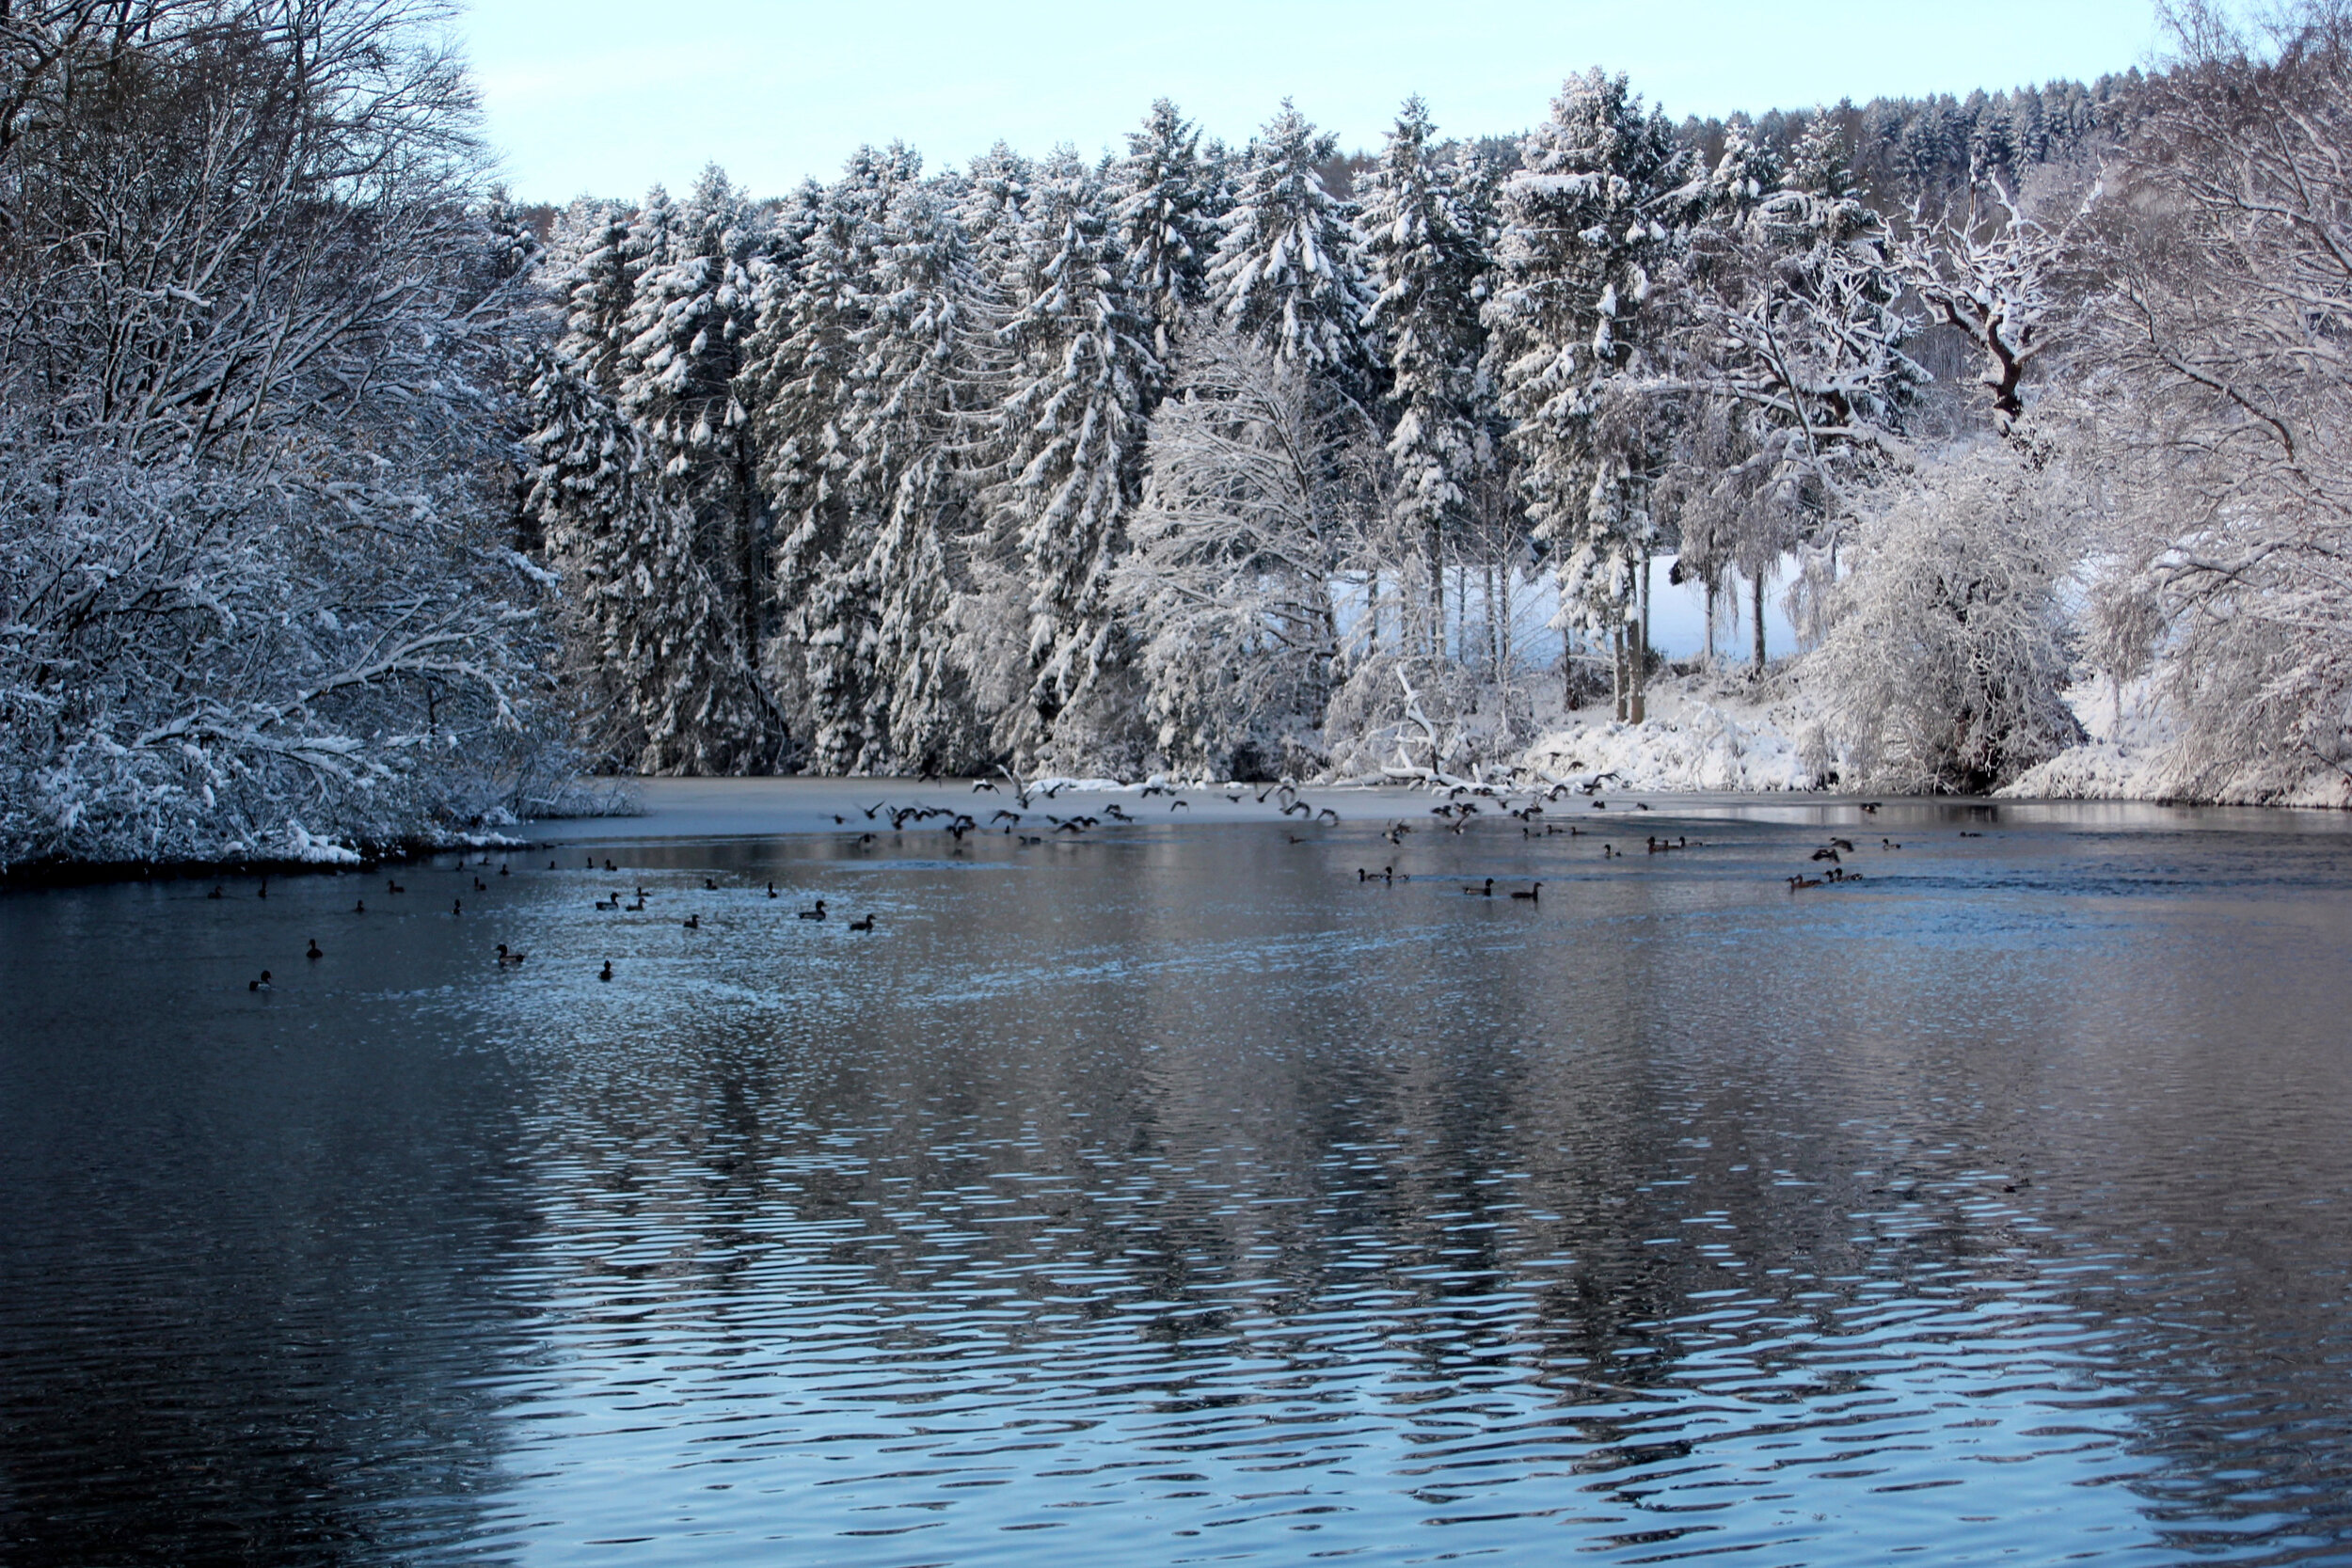 Snow covered lake scene with tall pine trees and ducks in the lake 